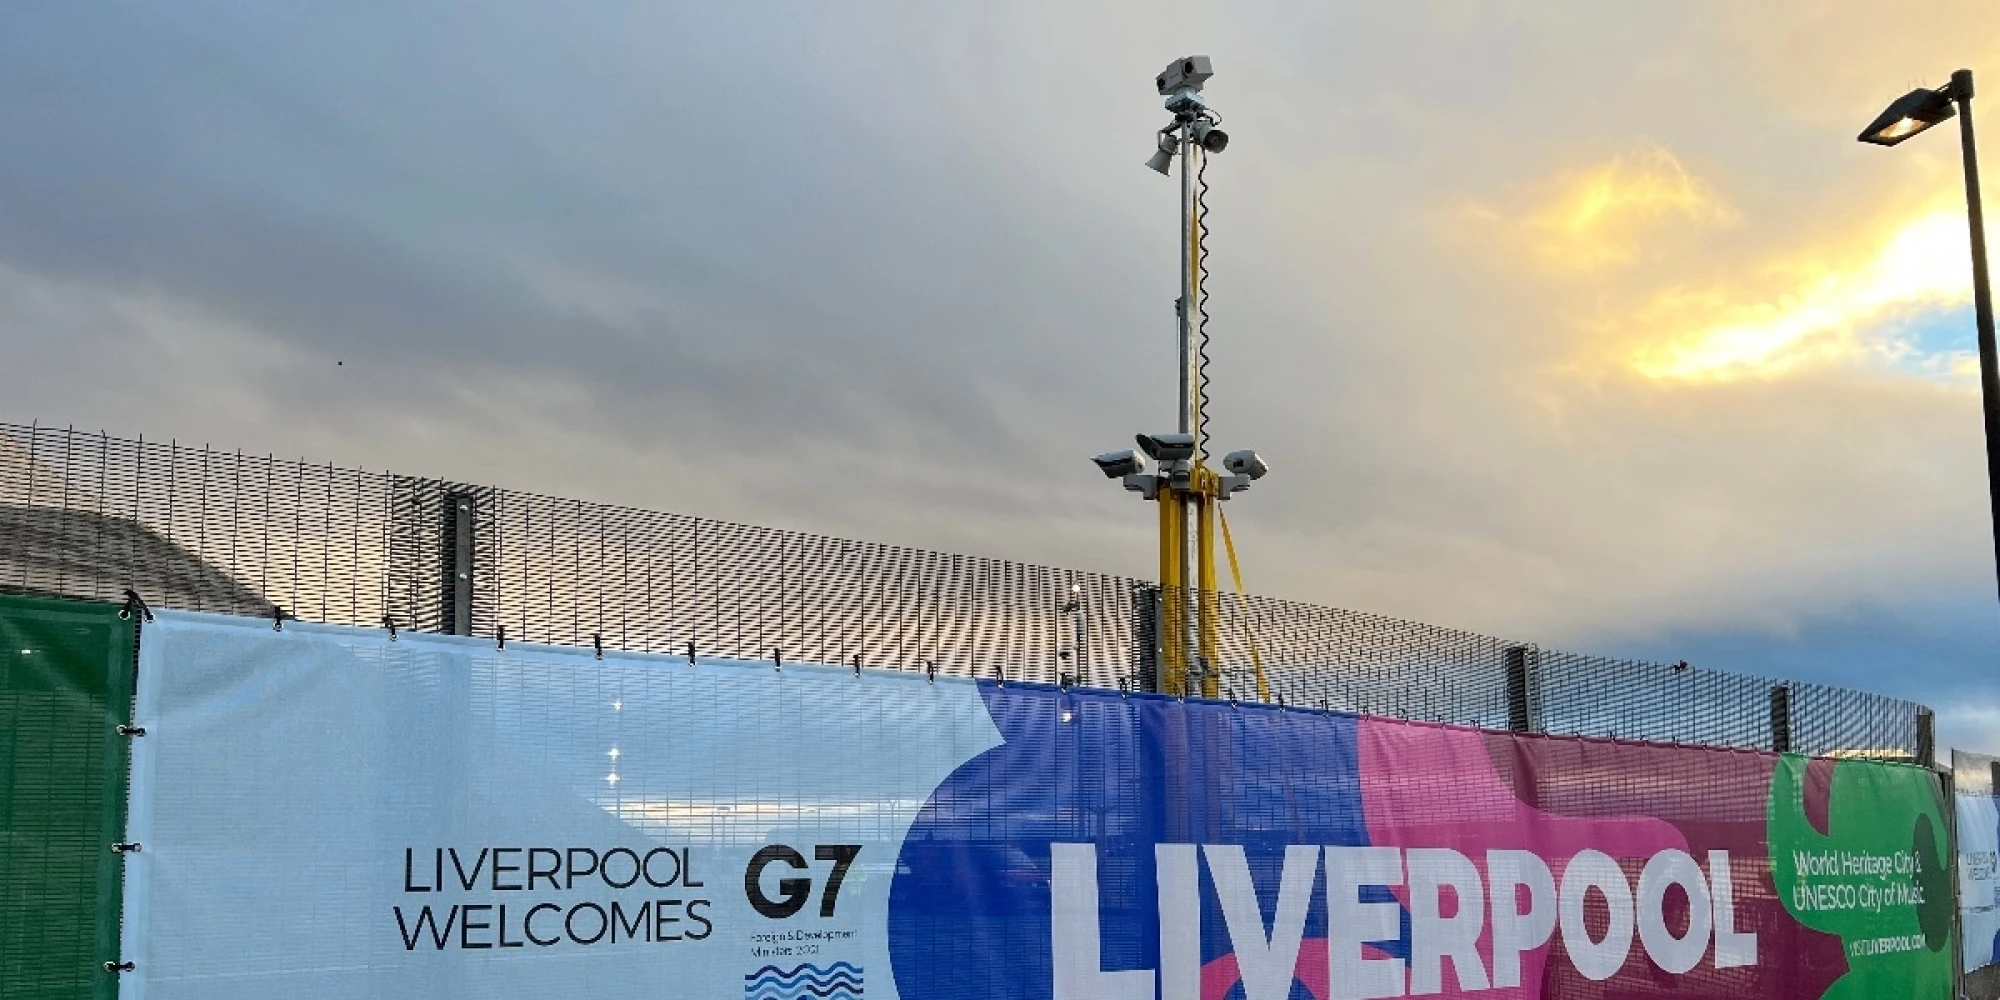 WCCTV CCTV Tower Secures the G7 Conference in Liverpool